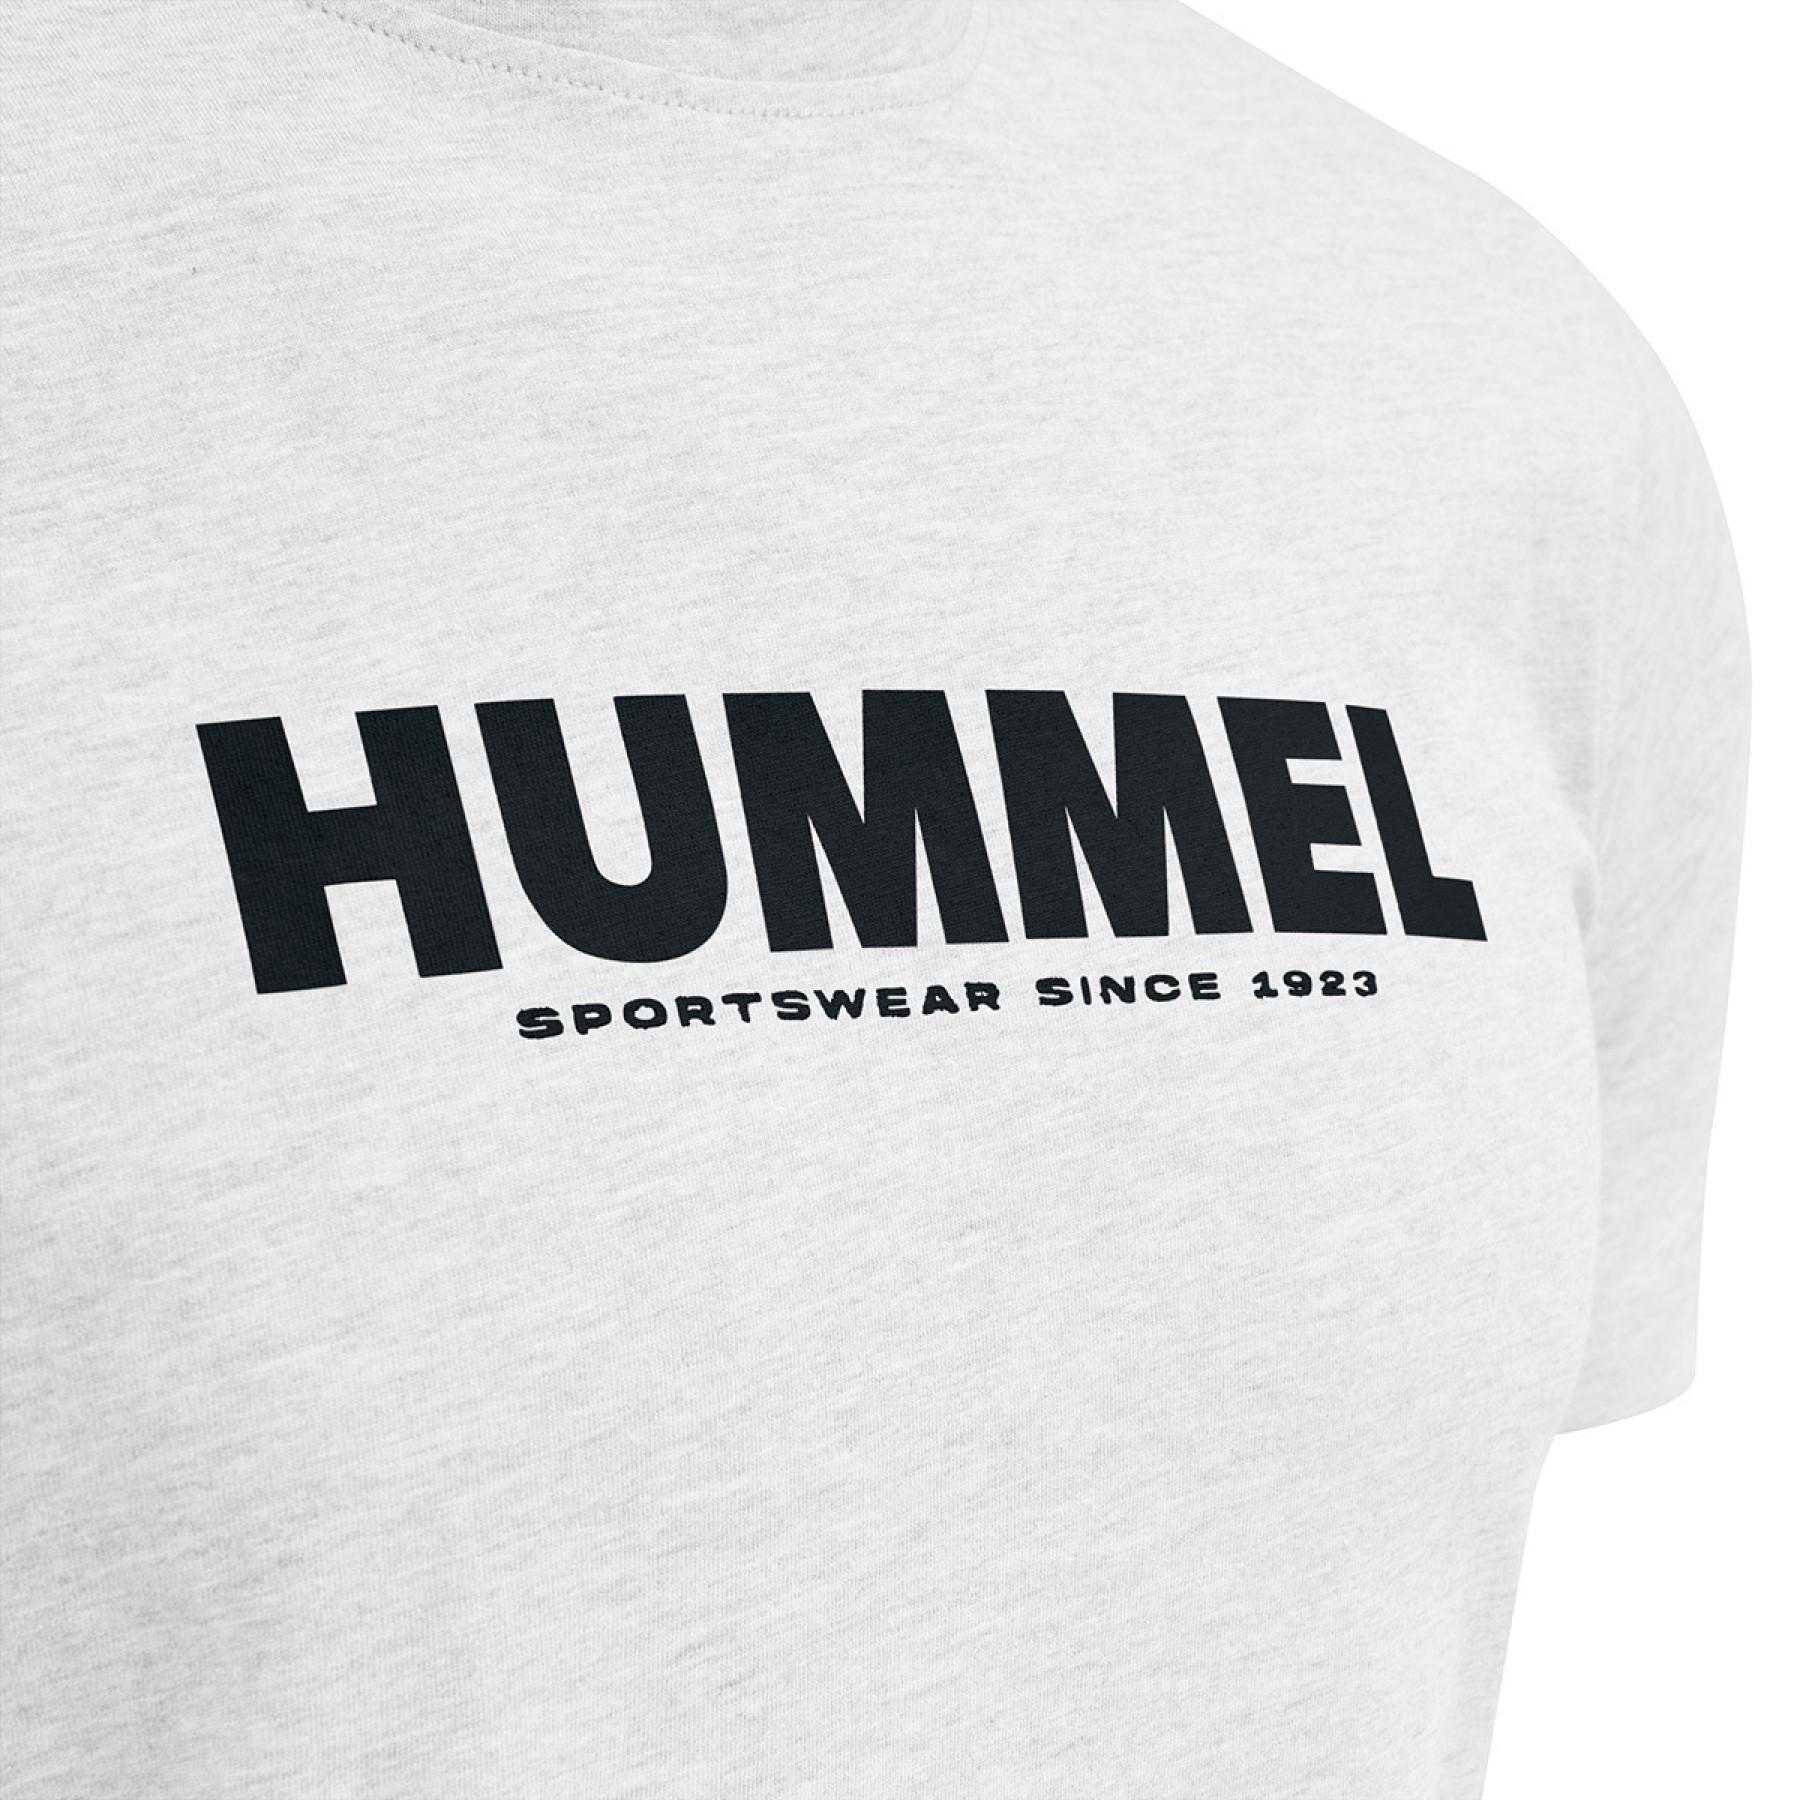 T-shirt Hummel hmllegacy - T-shirts and polos - Textile - Table tennis